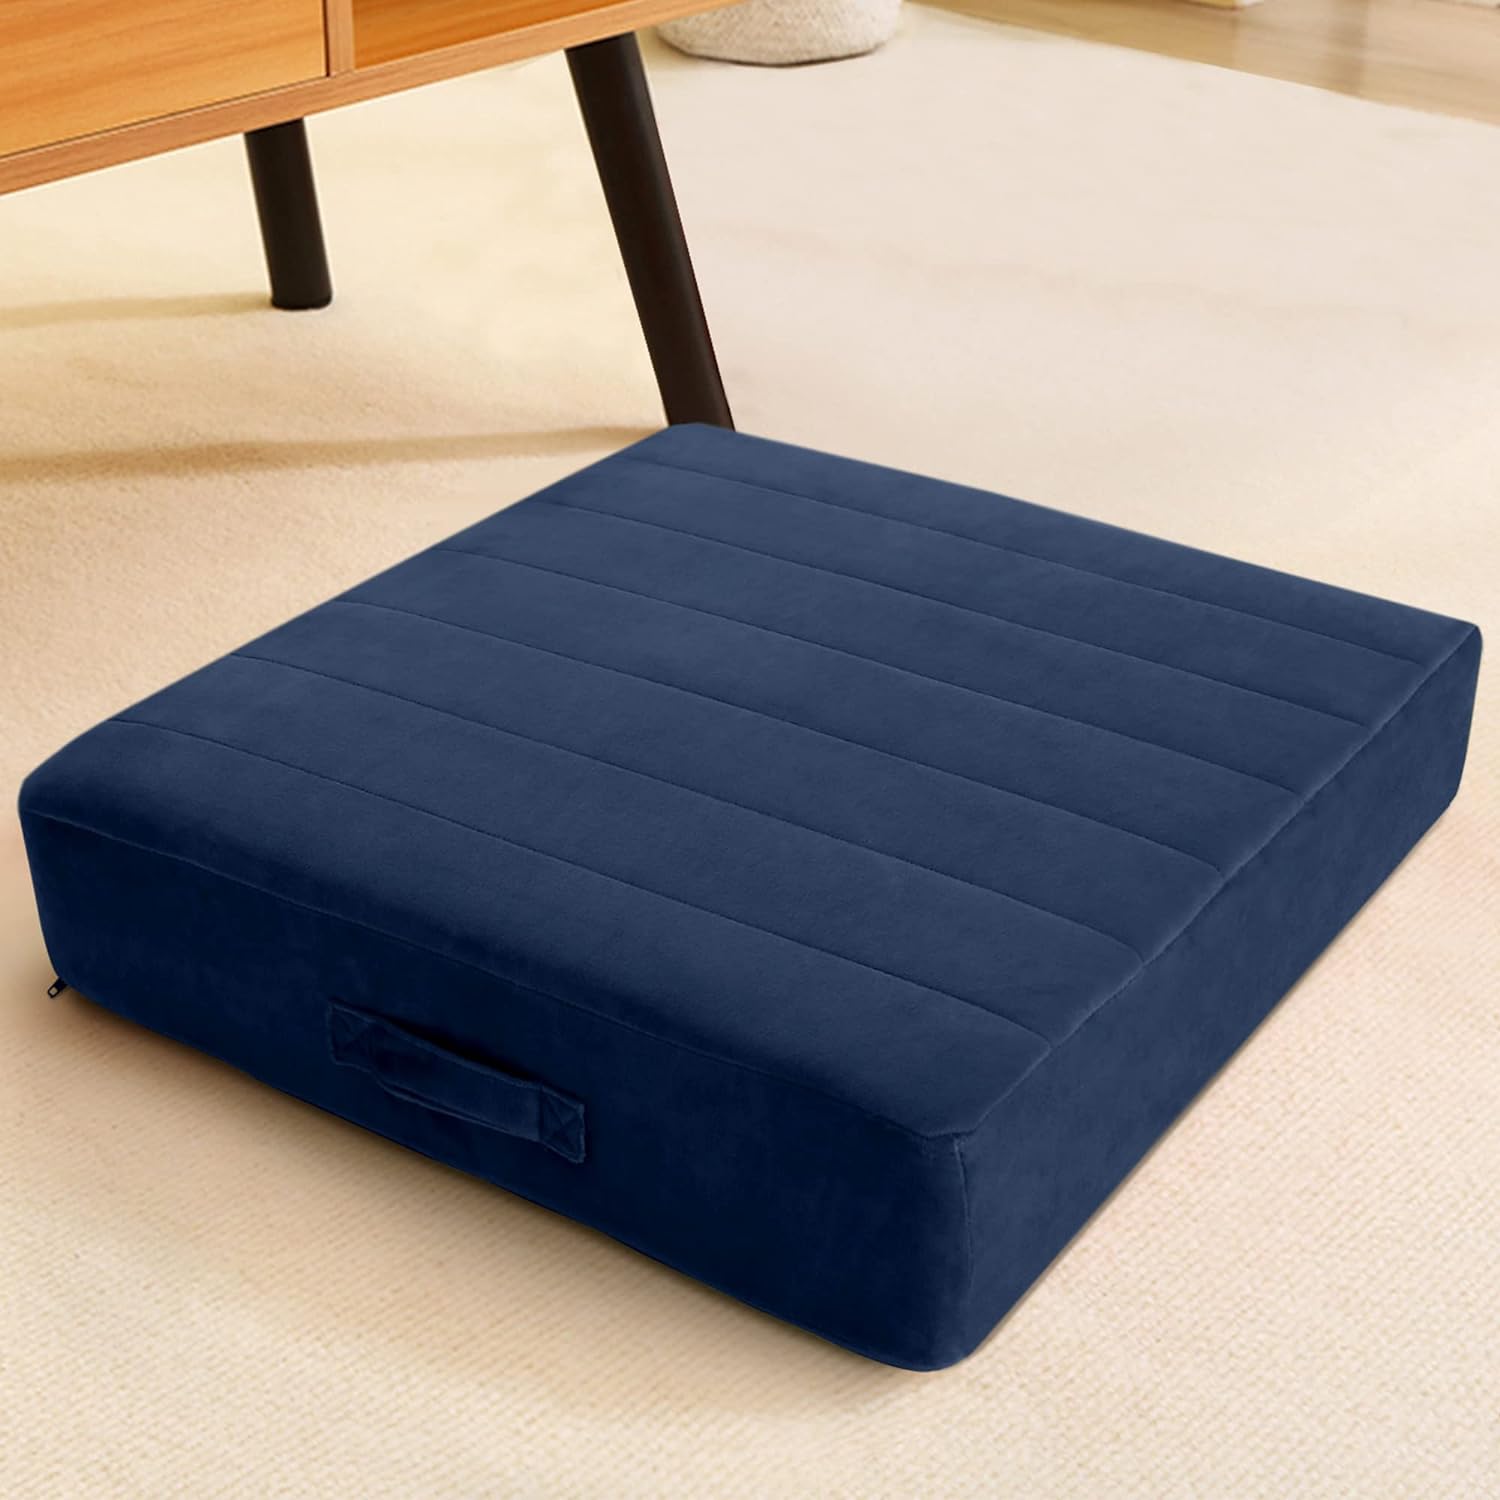 MeMoreCool Square Floor Pillow Seating for Adults Kids, Large Meditation Cushion Floor Pillow with Thick Foam & Soft Tufted Cover, Washable Big Pillow Seat Floor Cushion for Sitting Yoga 22" Navy